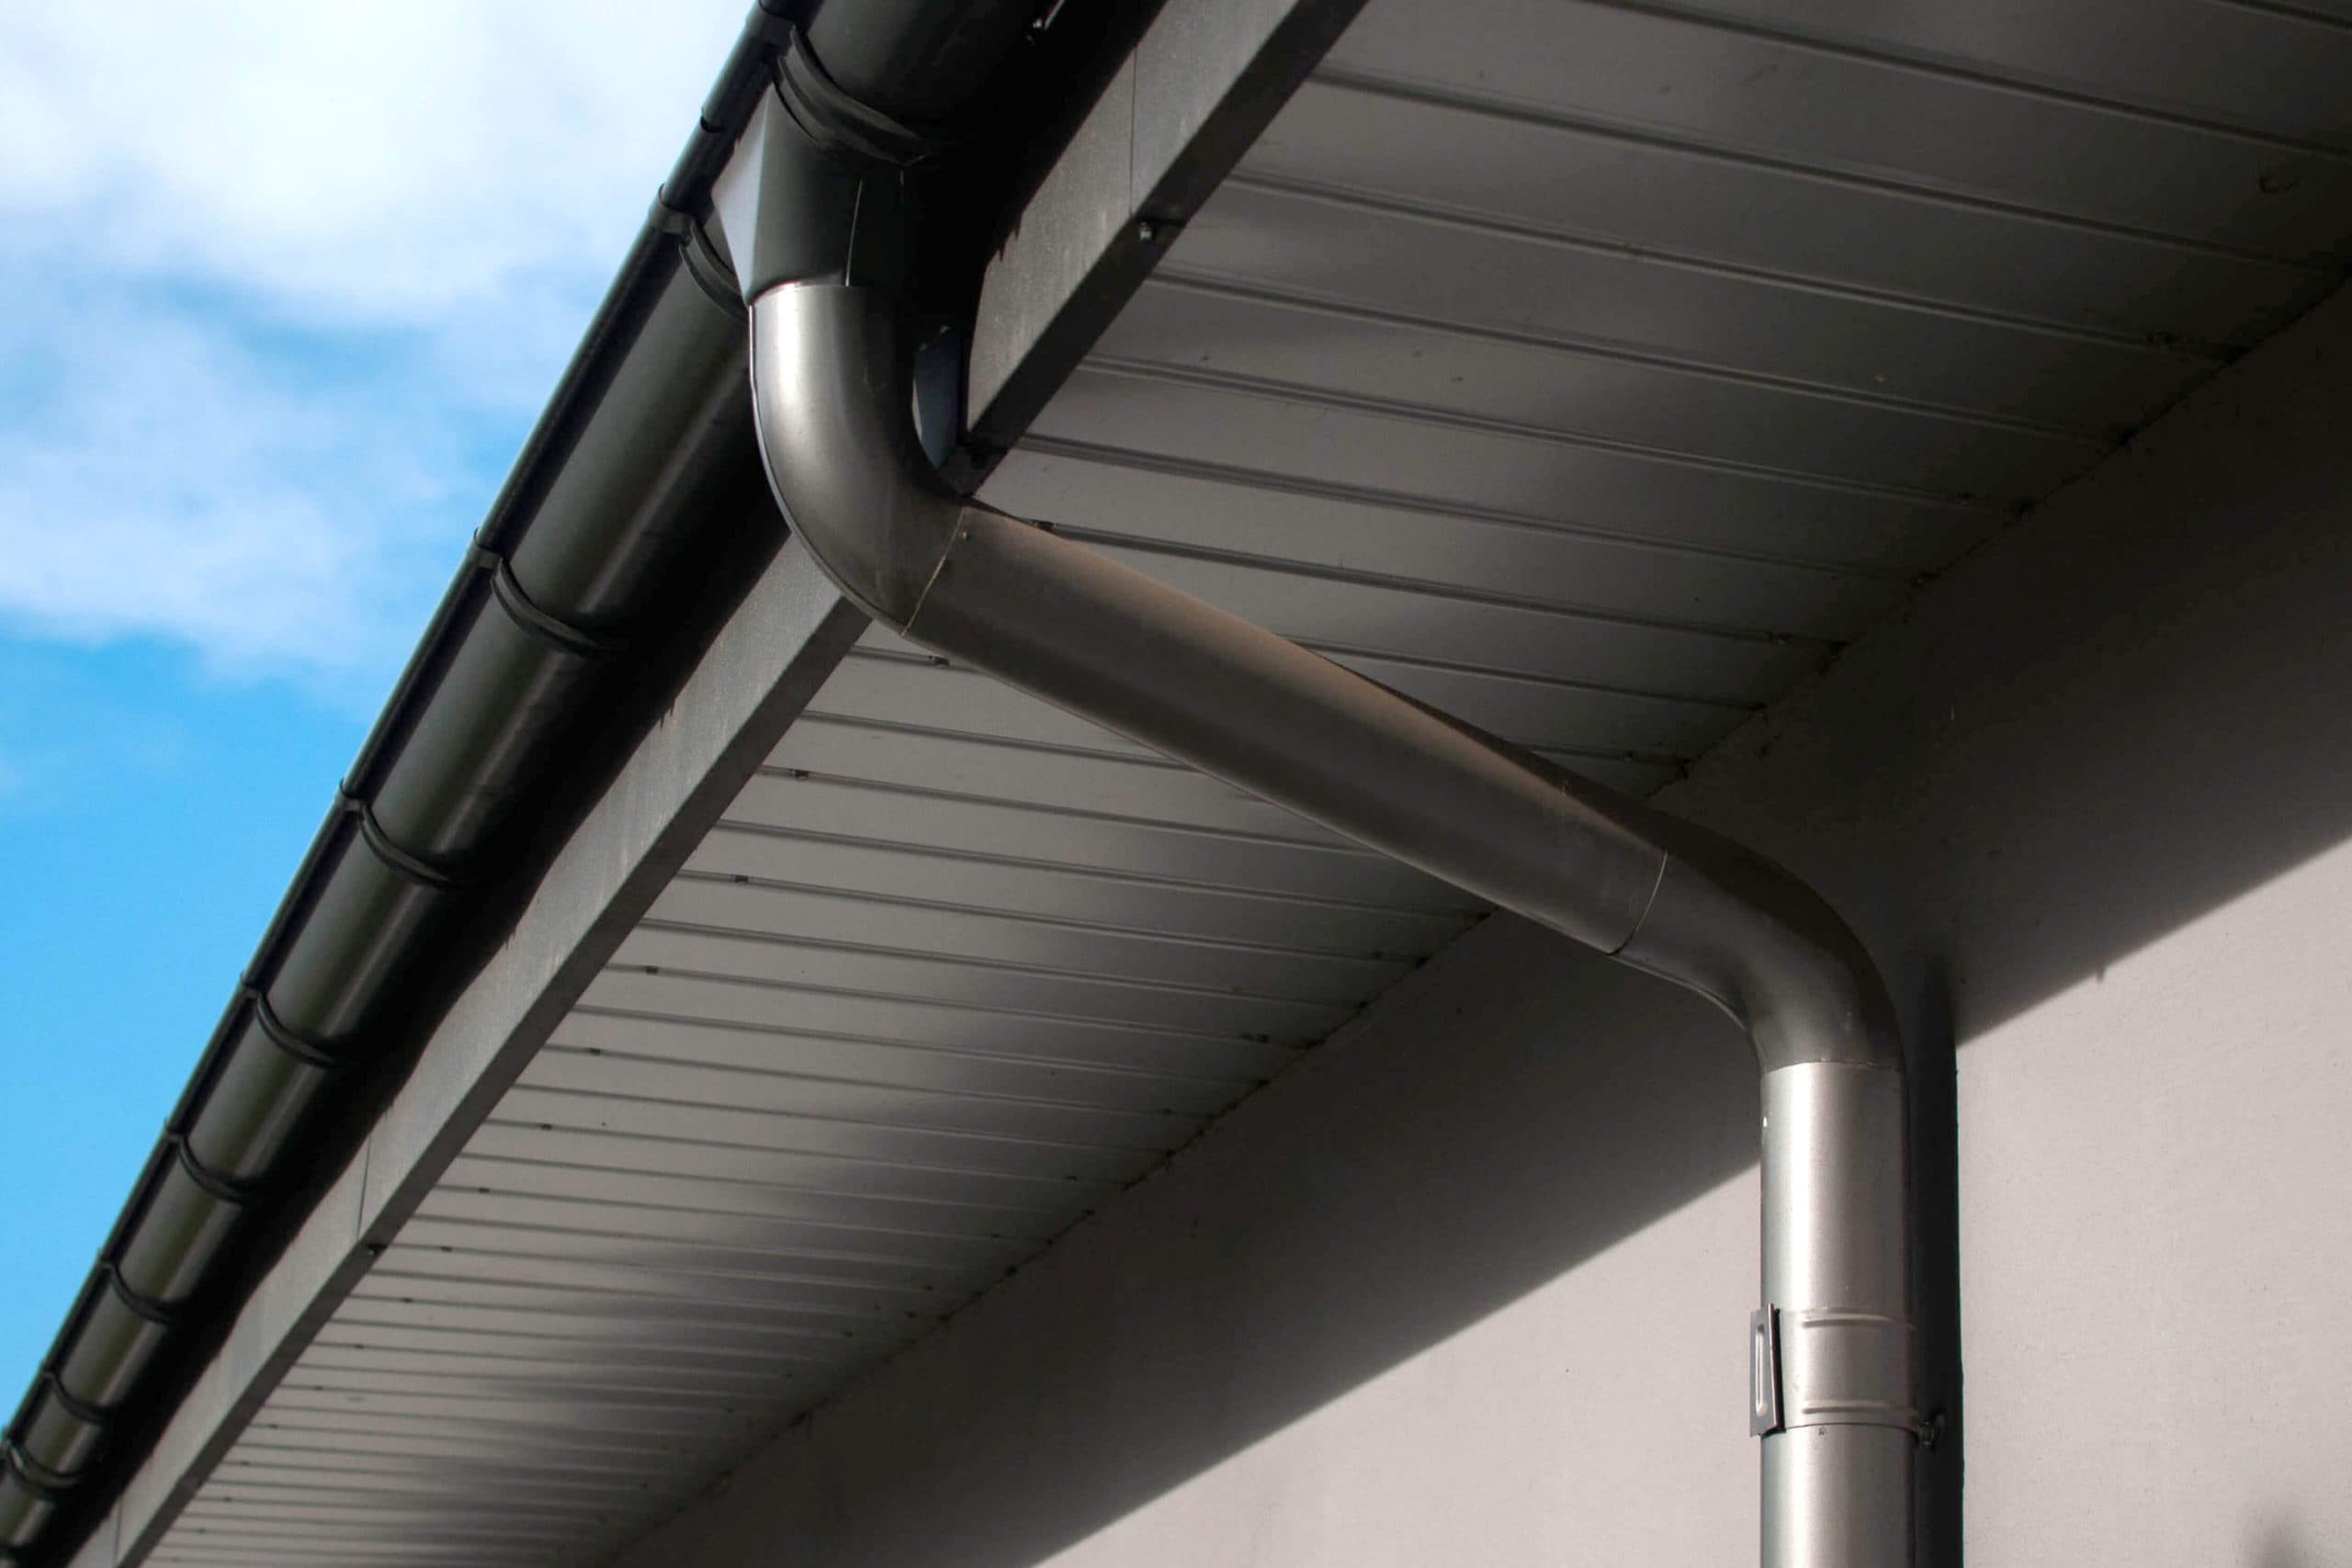 Reliable and affordable Galvanized gutters installation in Phoenix